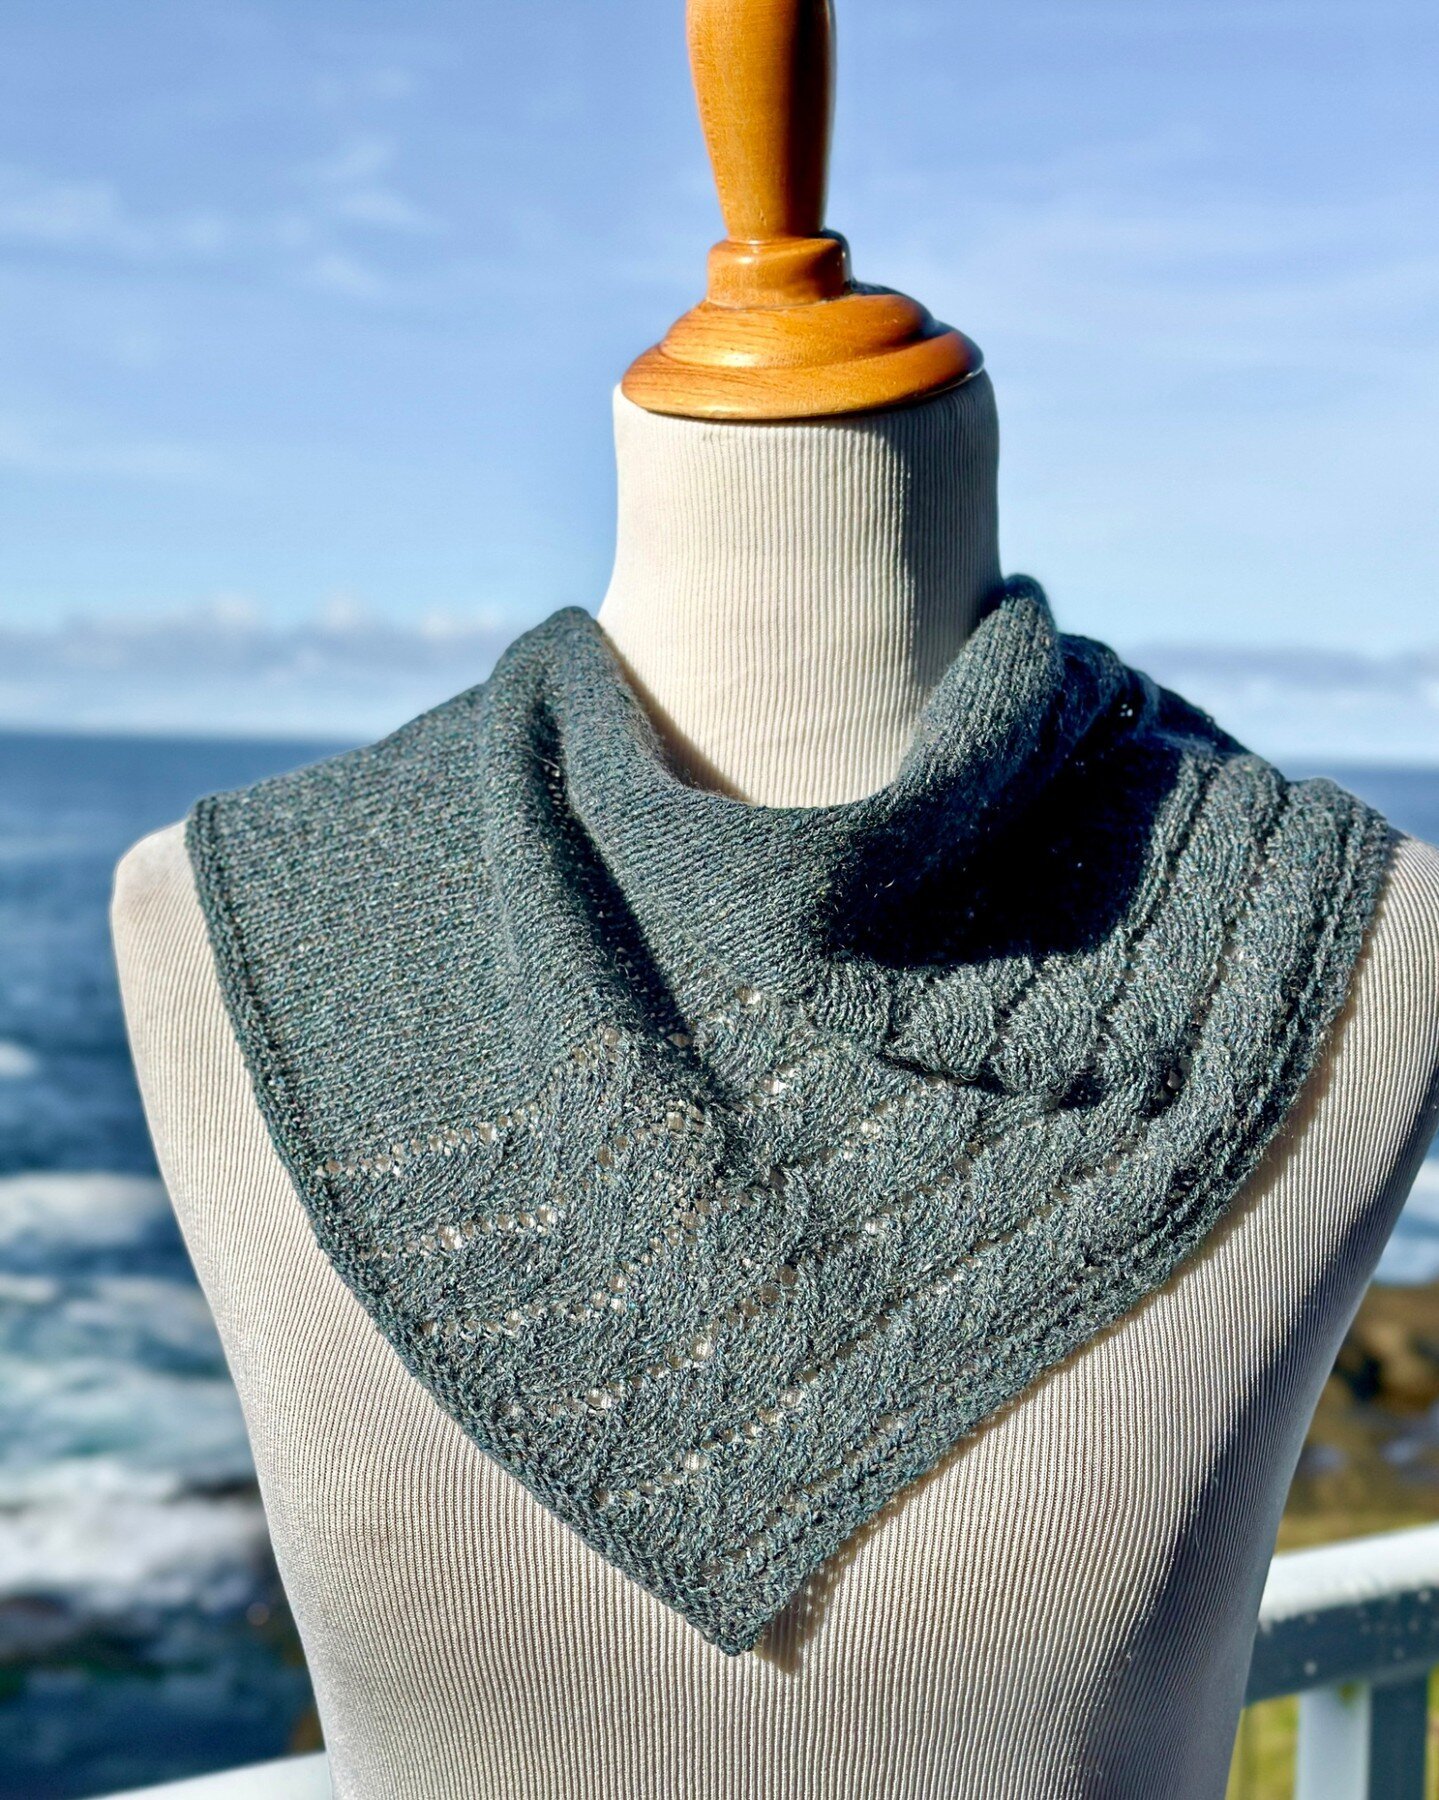 How's this for a balcony view? ☀️🌊 The stitch pattern is so easy on this little cowl and there are 2 options for the lace too. Which width of the lace do you prefer? The rose-gold one shows the wider option. 
.
See below for the intro discount and t